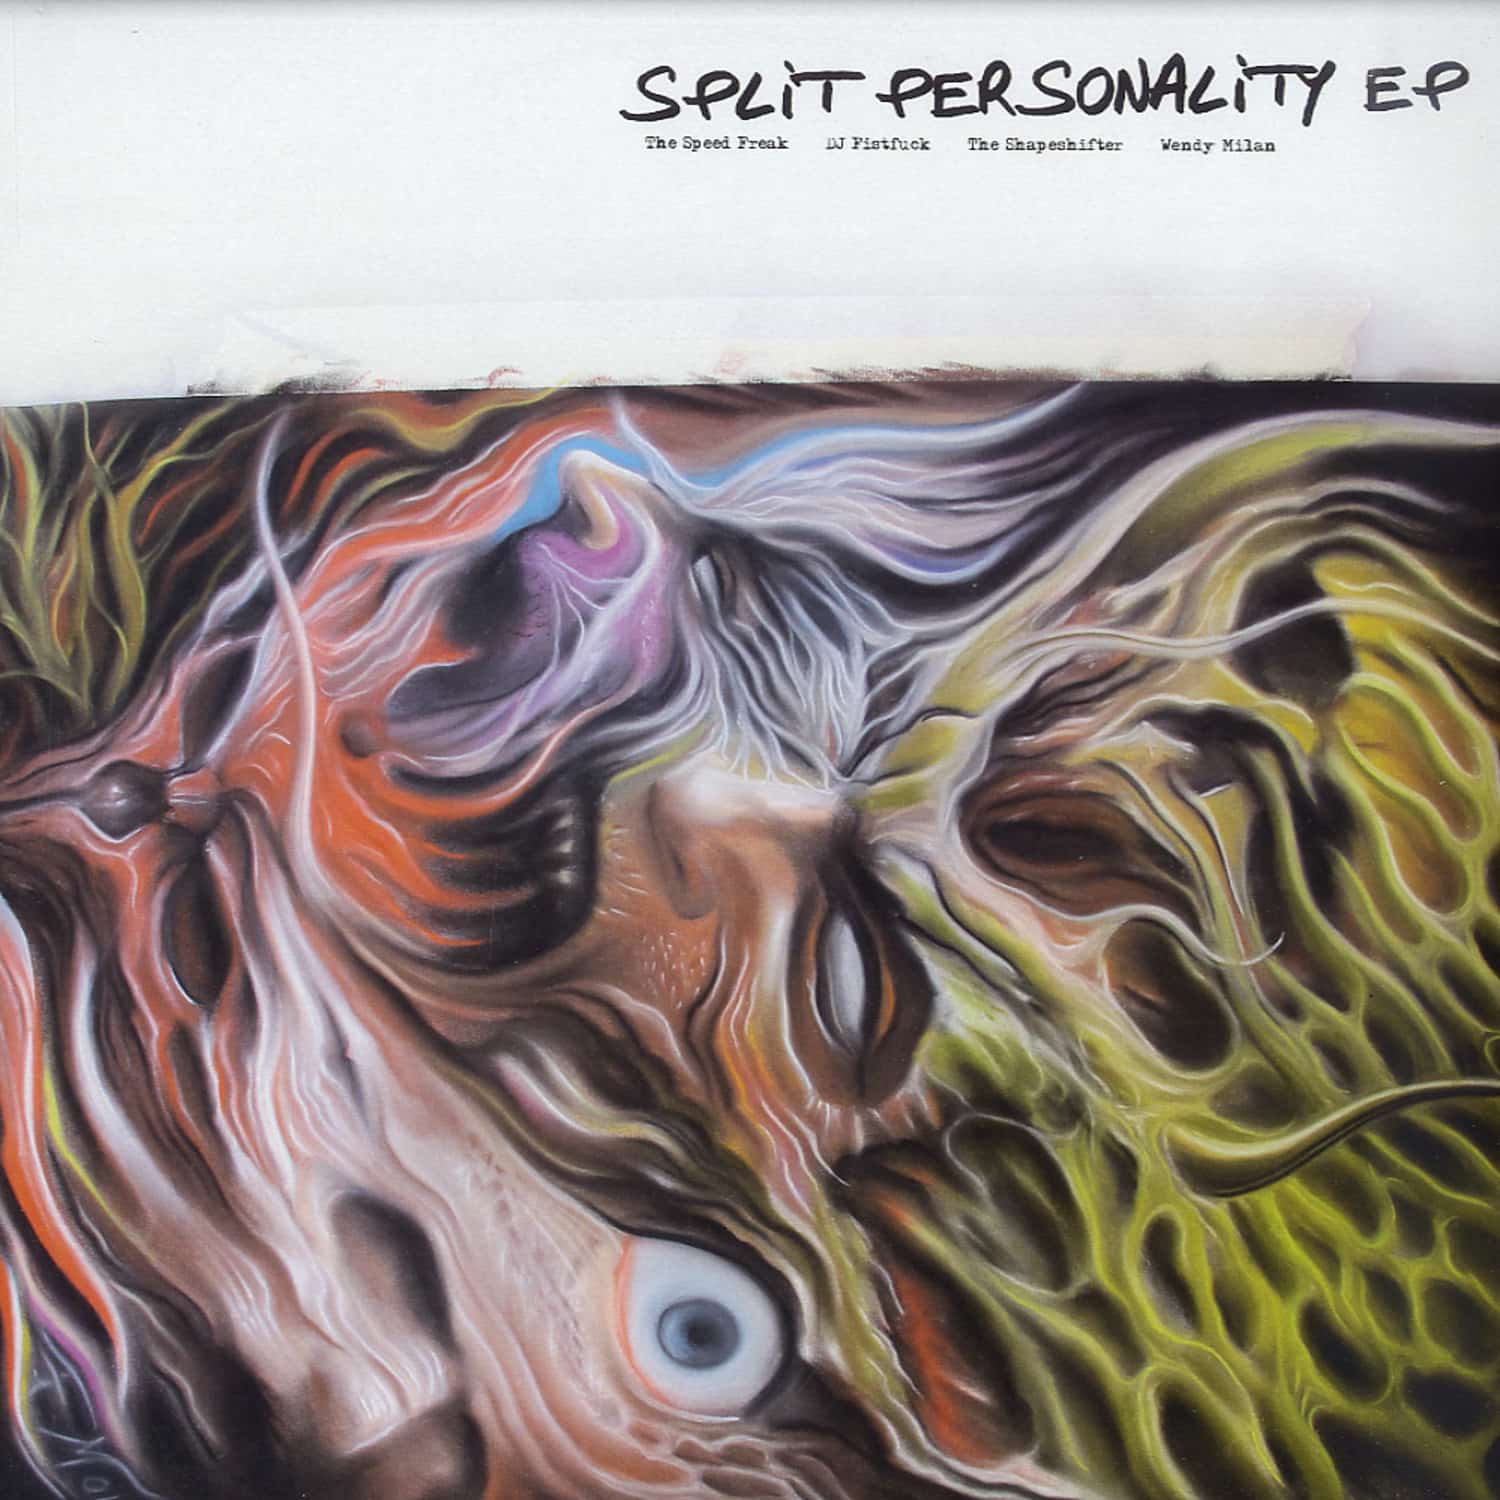 The Speed Freak - SLIT PERSONALITY EP